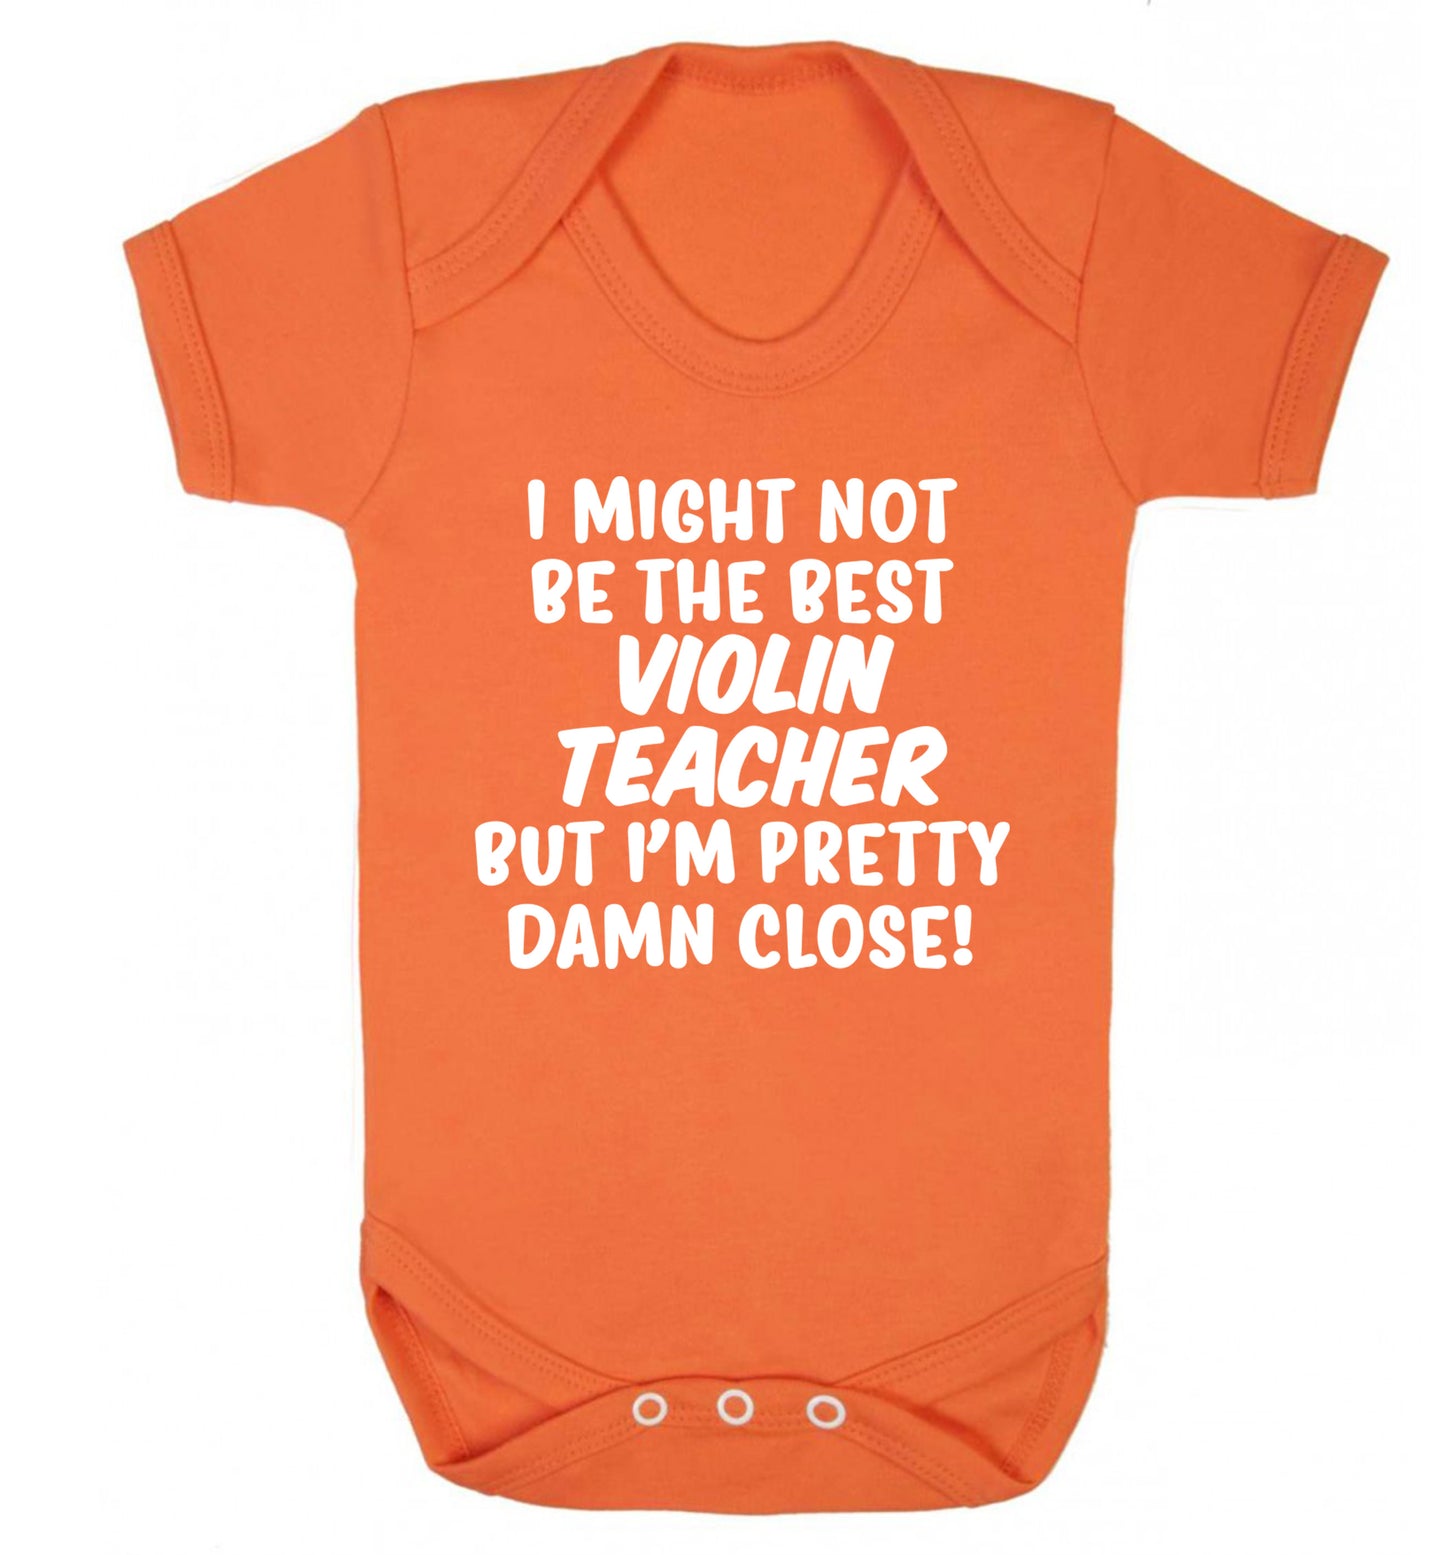 I might not be the best violin teacher but I'm pretty close Baby Vest orange 18-24 months